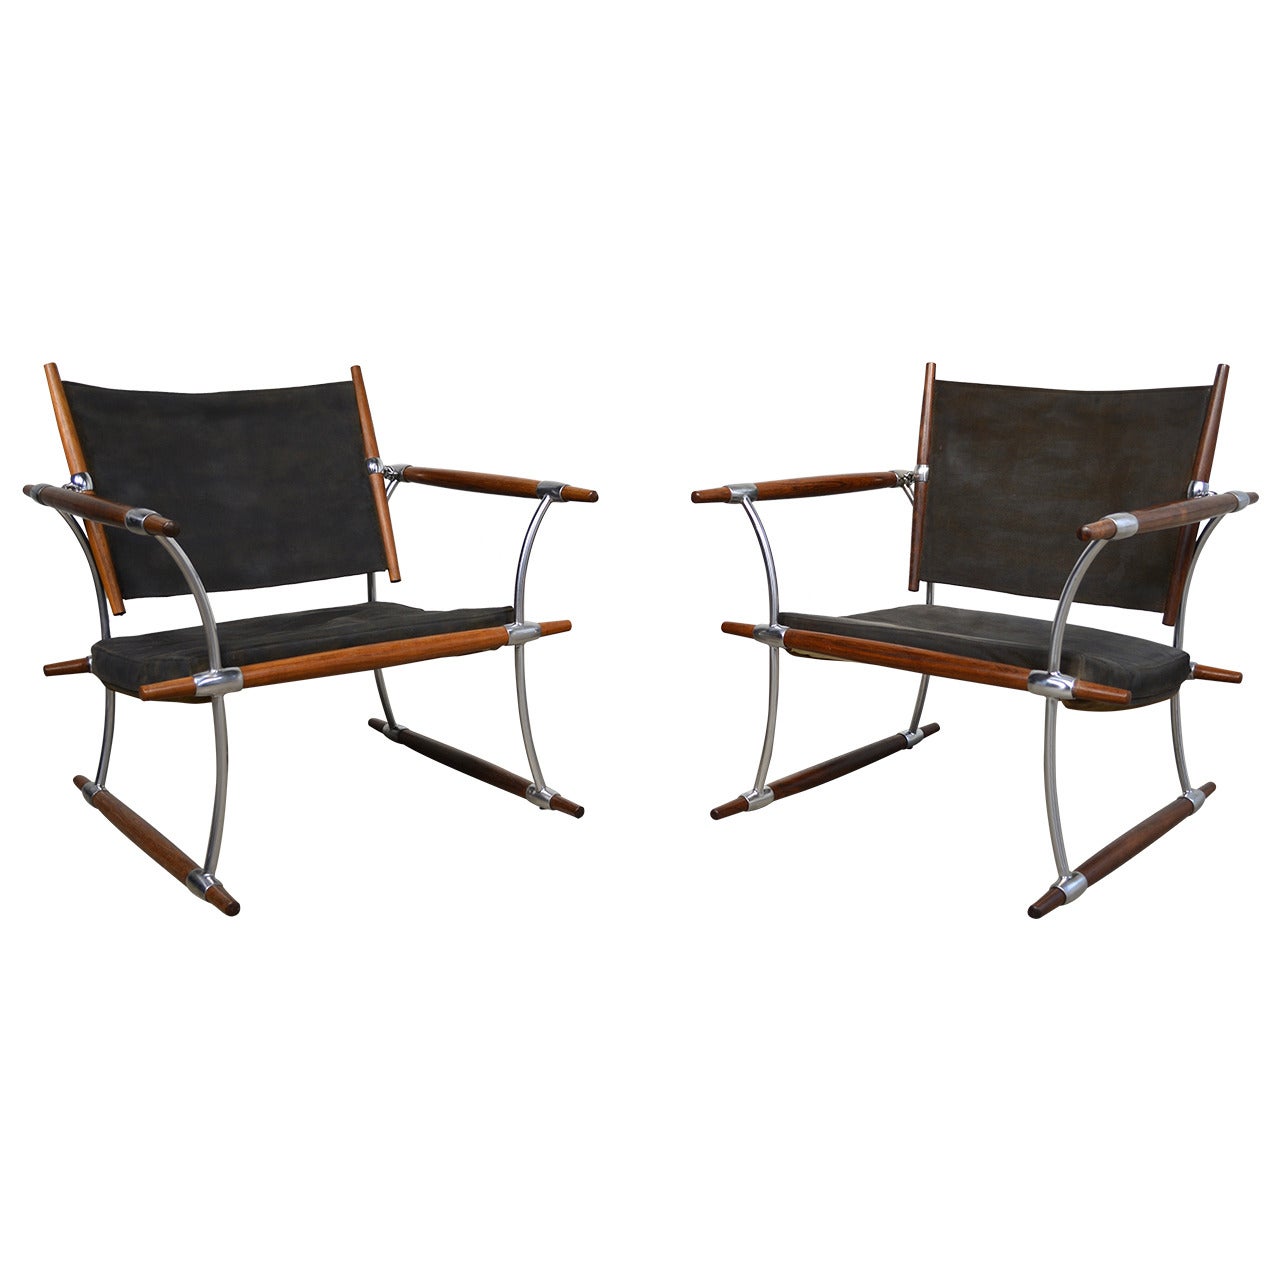 Jens Quistgaard Pair of "Stokke" Rosewood Danish Modern Lounge Chairs For Sale